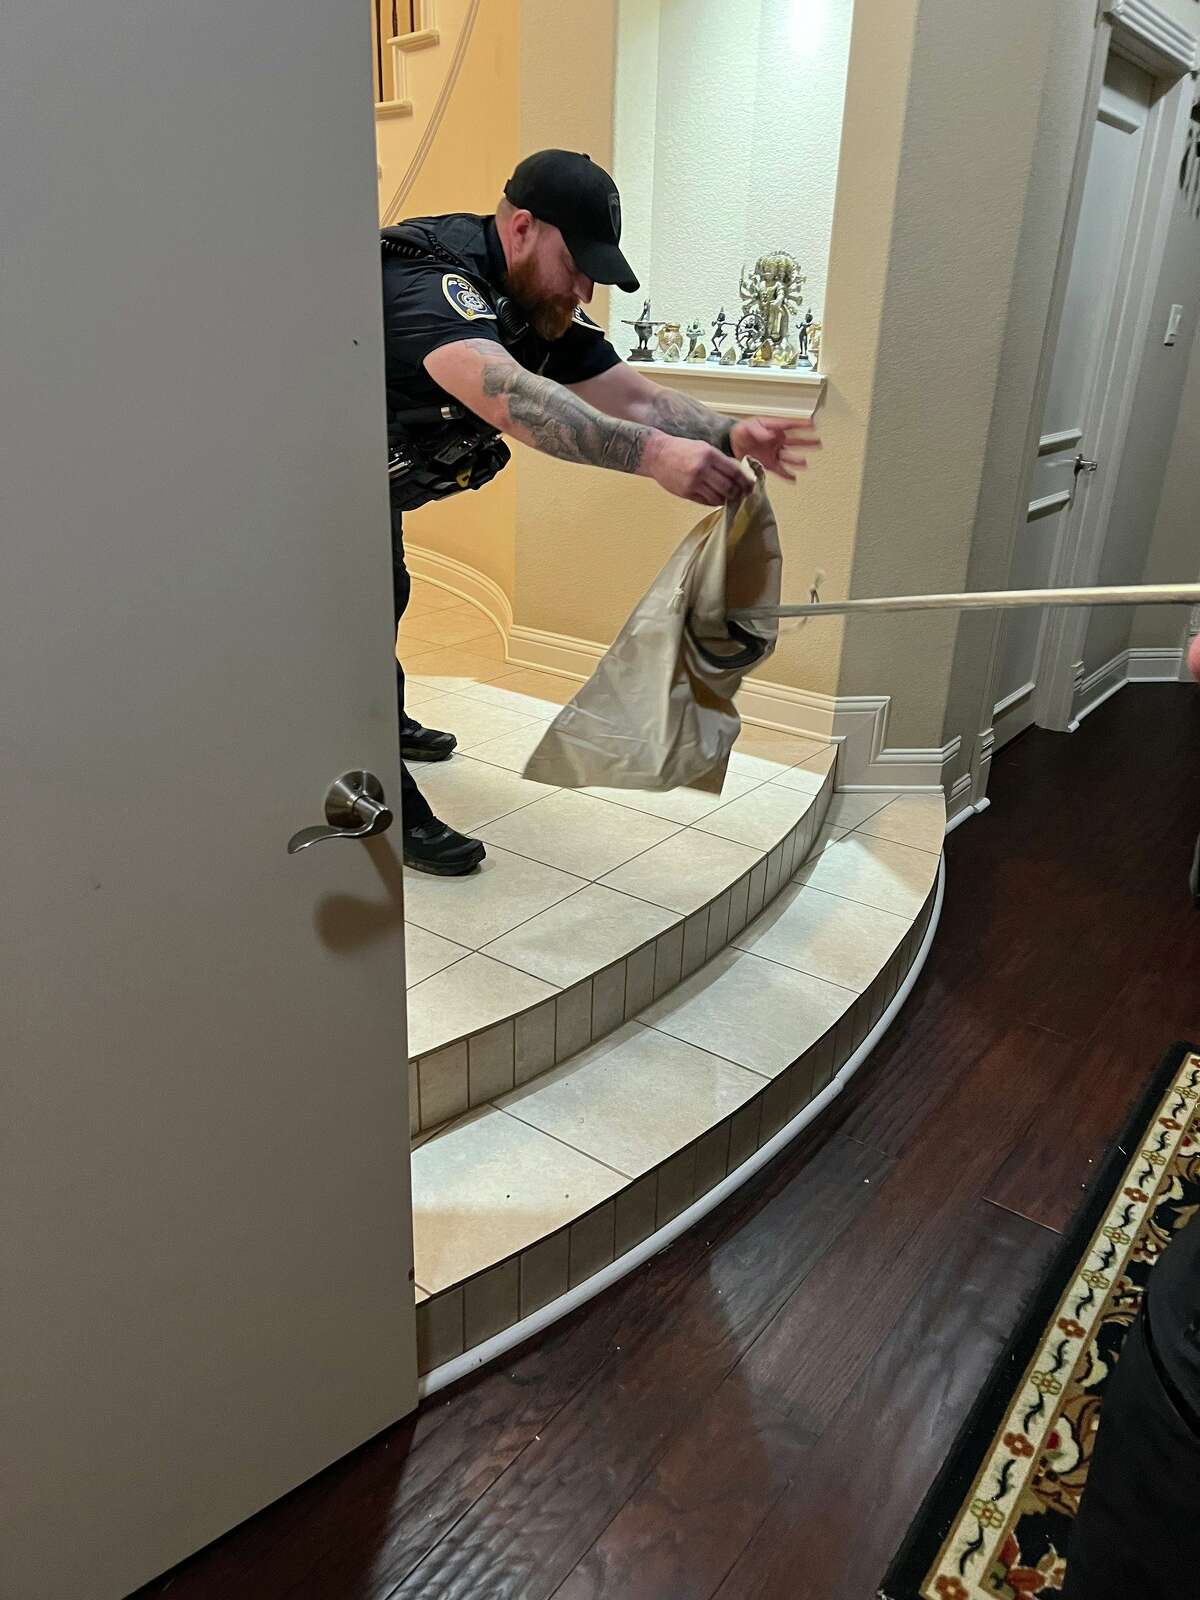 Southlake DPS wrote in its Tuesday, May 10 post how officers helped remove the cottonmouth snake that was hanging out inside the residence in Southlake, which is in the Fort Worth area. Snakes are known to be very active during the spring as they search for food and shelter from the sun. 